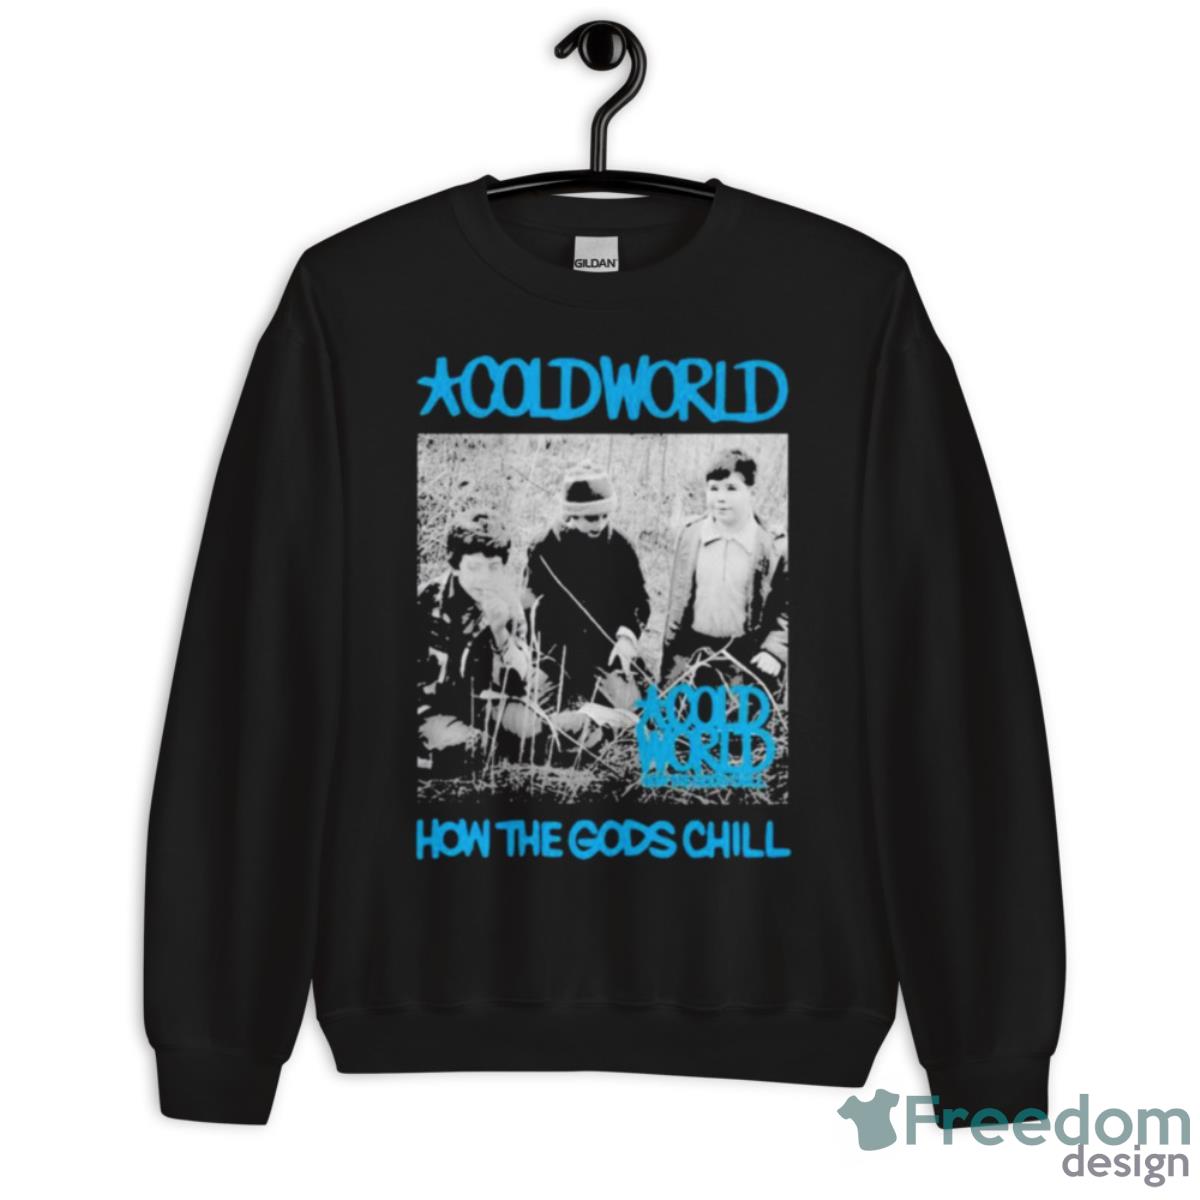 Cold World Htgc Cover Deathwish Inc How The Gods Chill Shirt